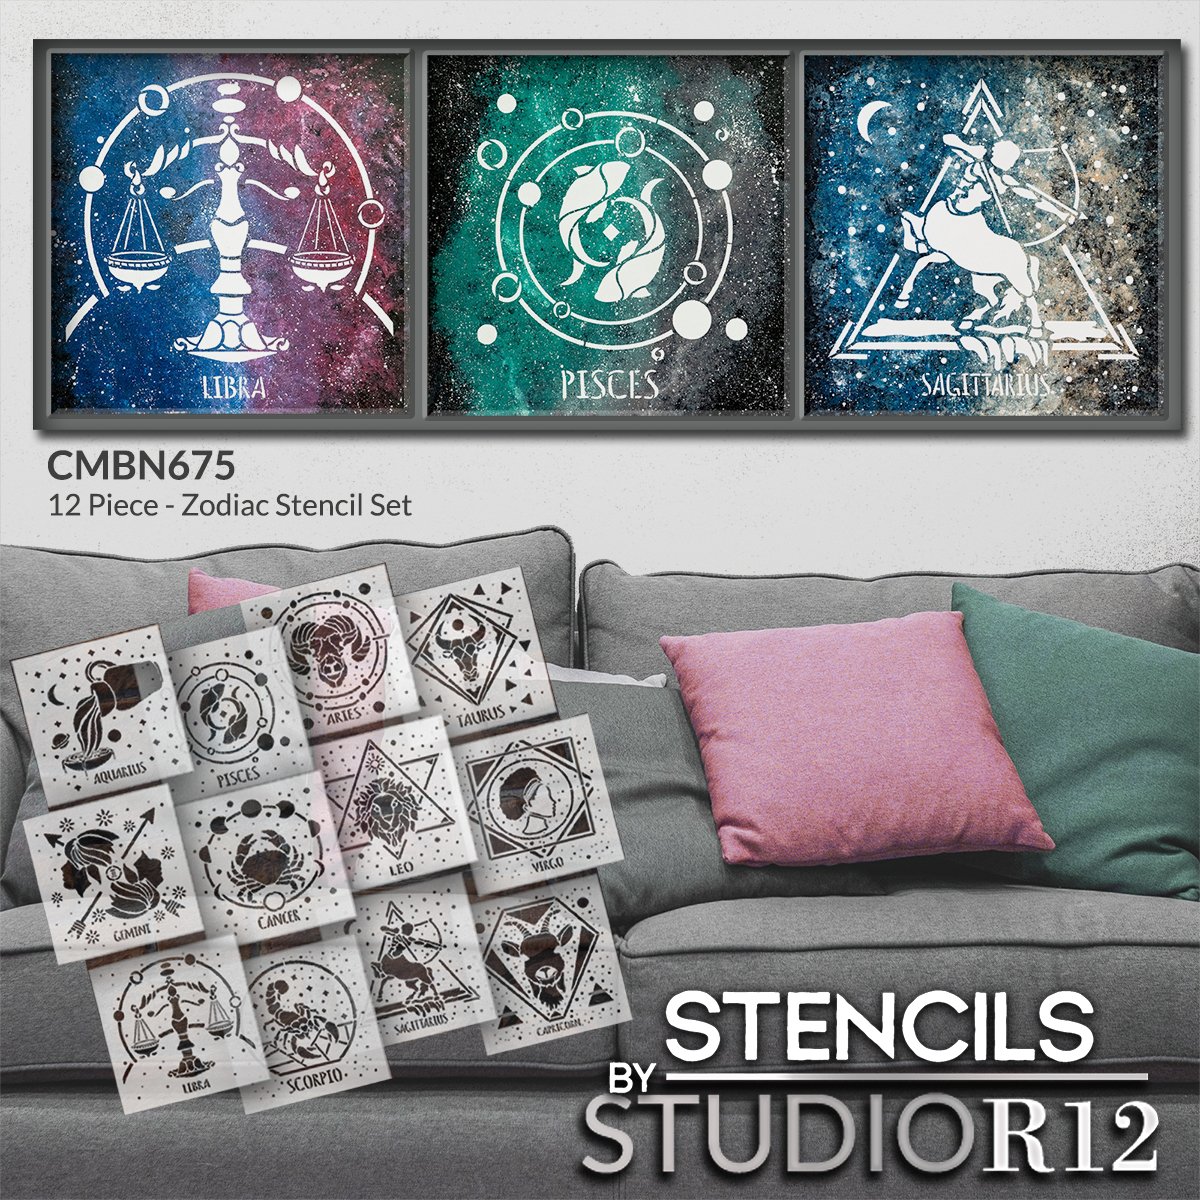 Zodiac Sign Stencil Set by StudioR12 - Select Size - USA Made - DIY Star Sign Celestial Bedroom & Home Decor | Paint Boho Astrological Wood Signs | CMBN675